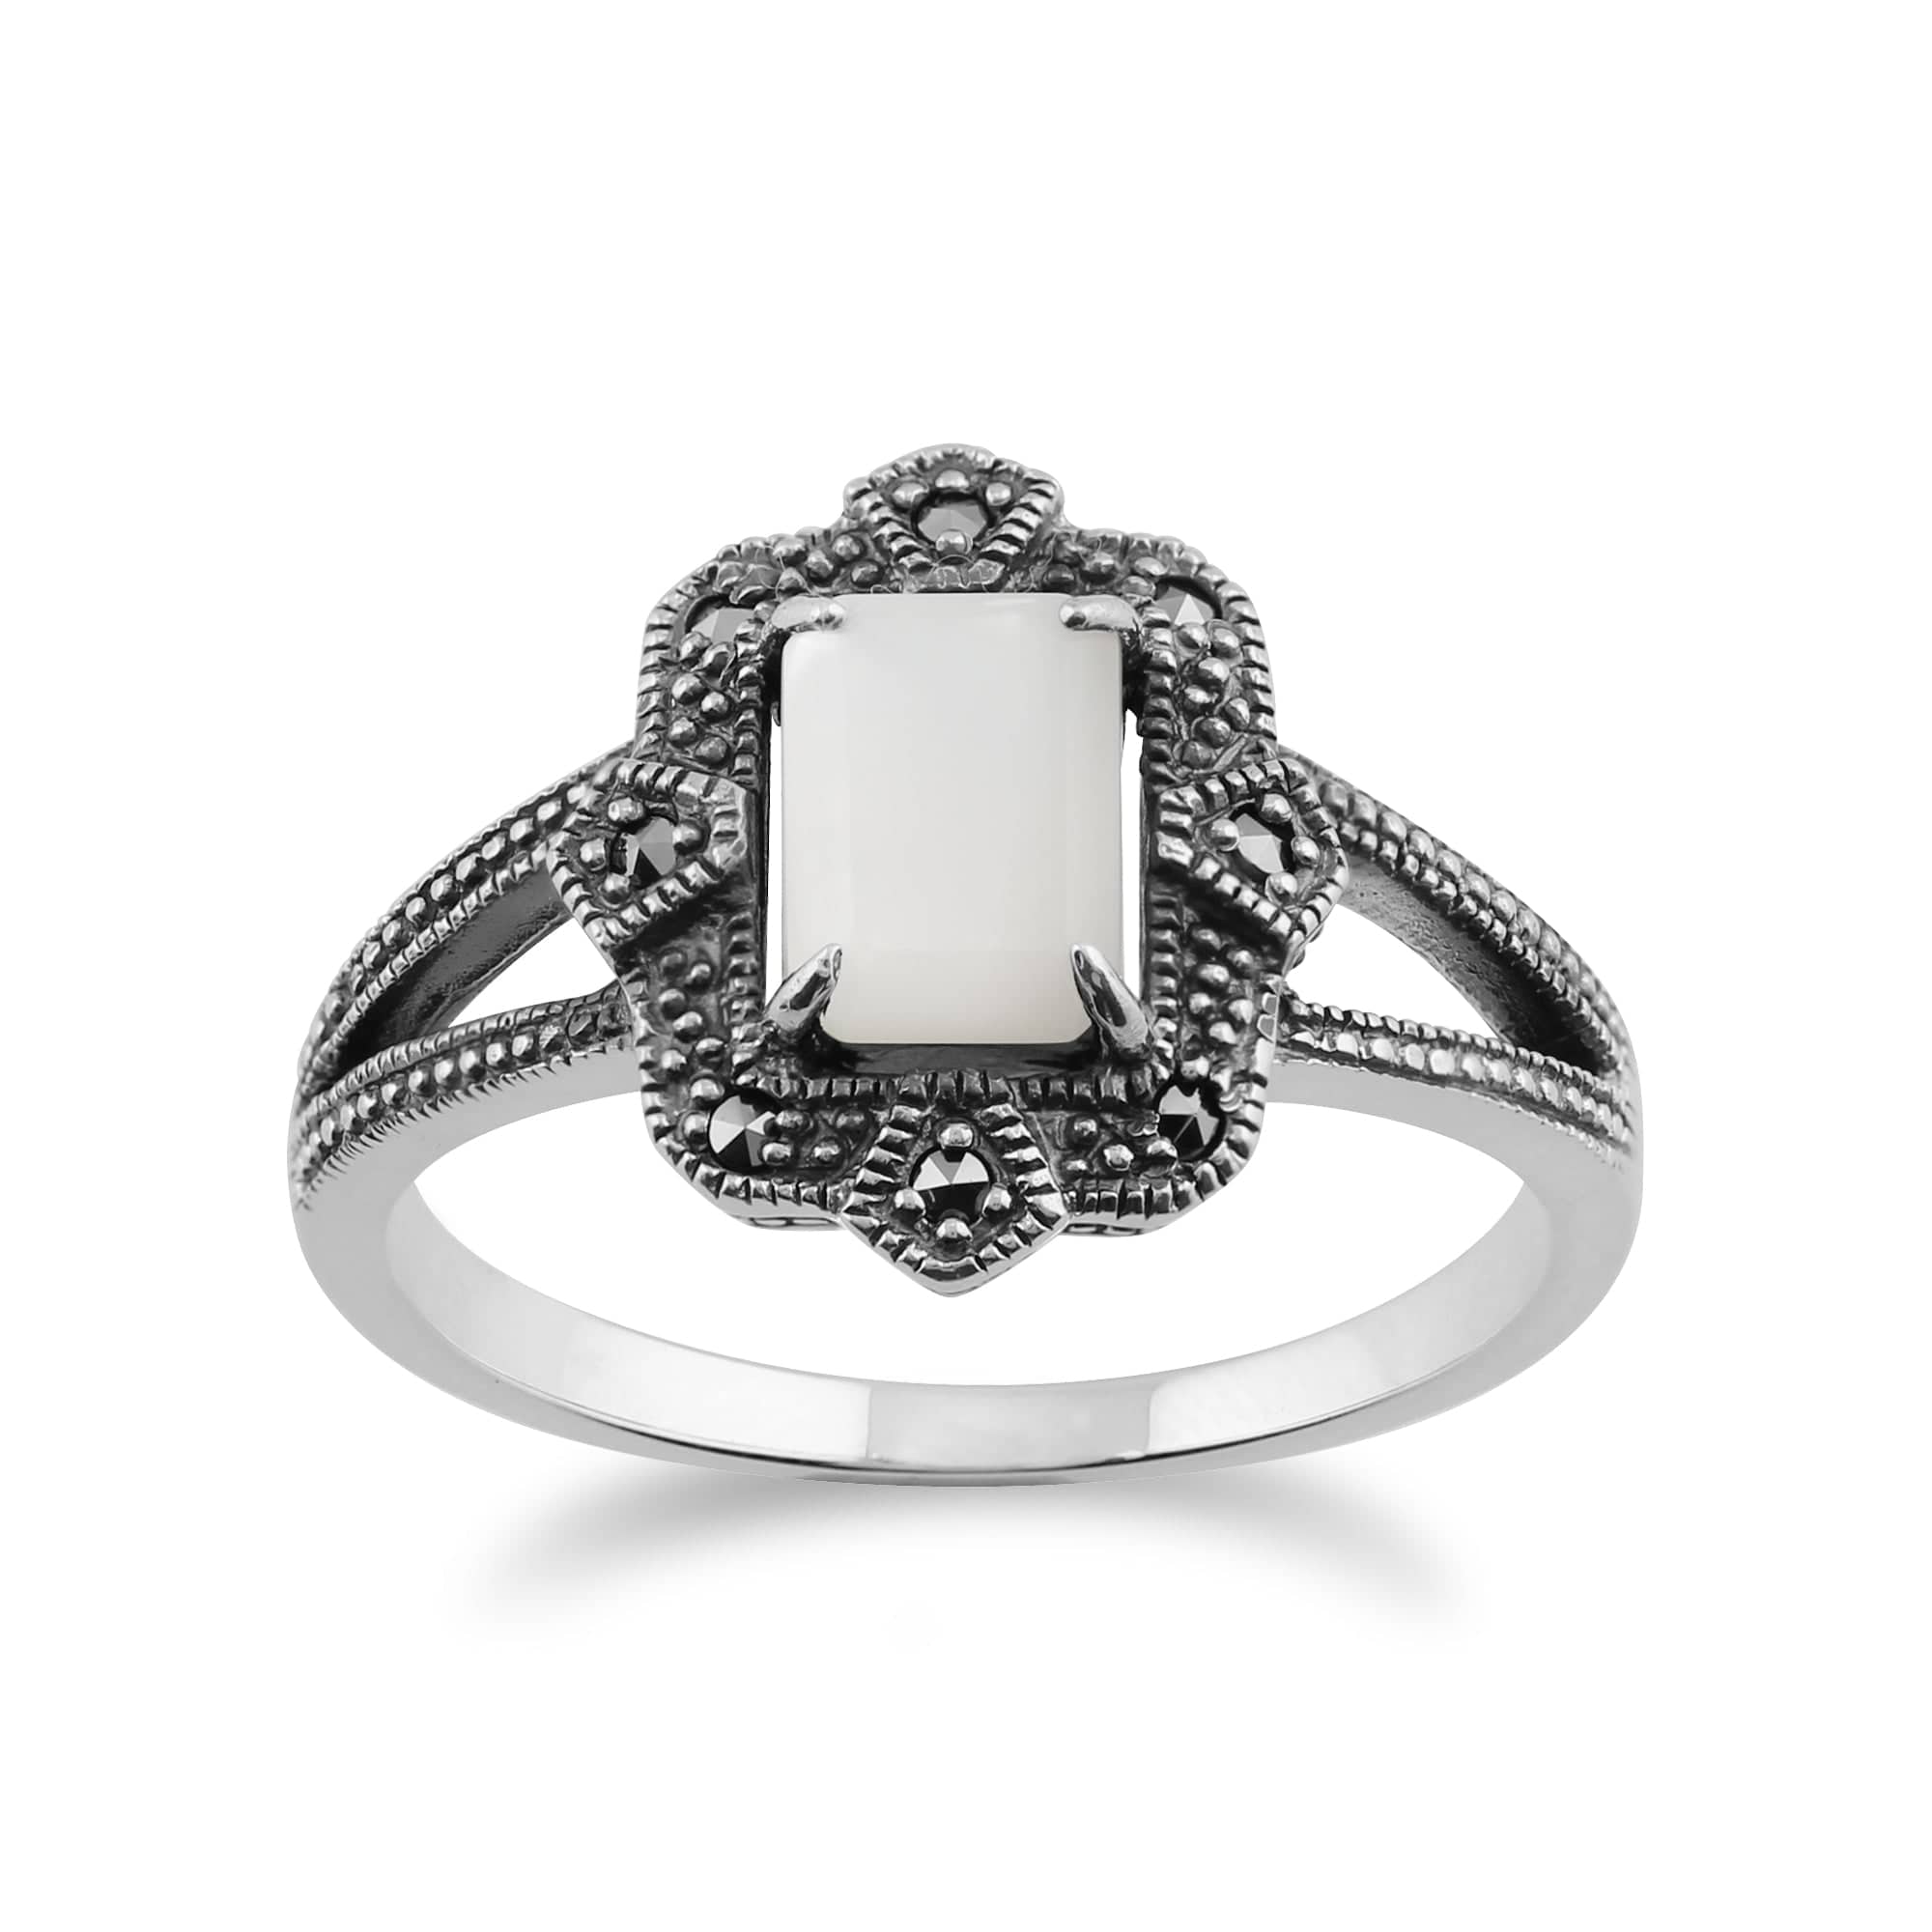 Art Deco Style Baguette Mother of Pearl & Marcasite Ring in 925 Sterling Silver - Gemondo